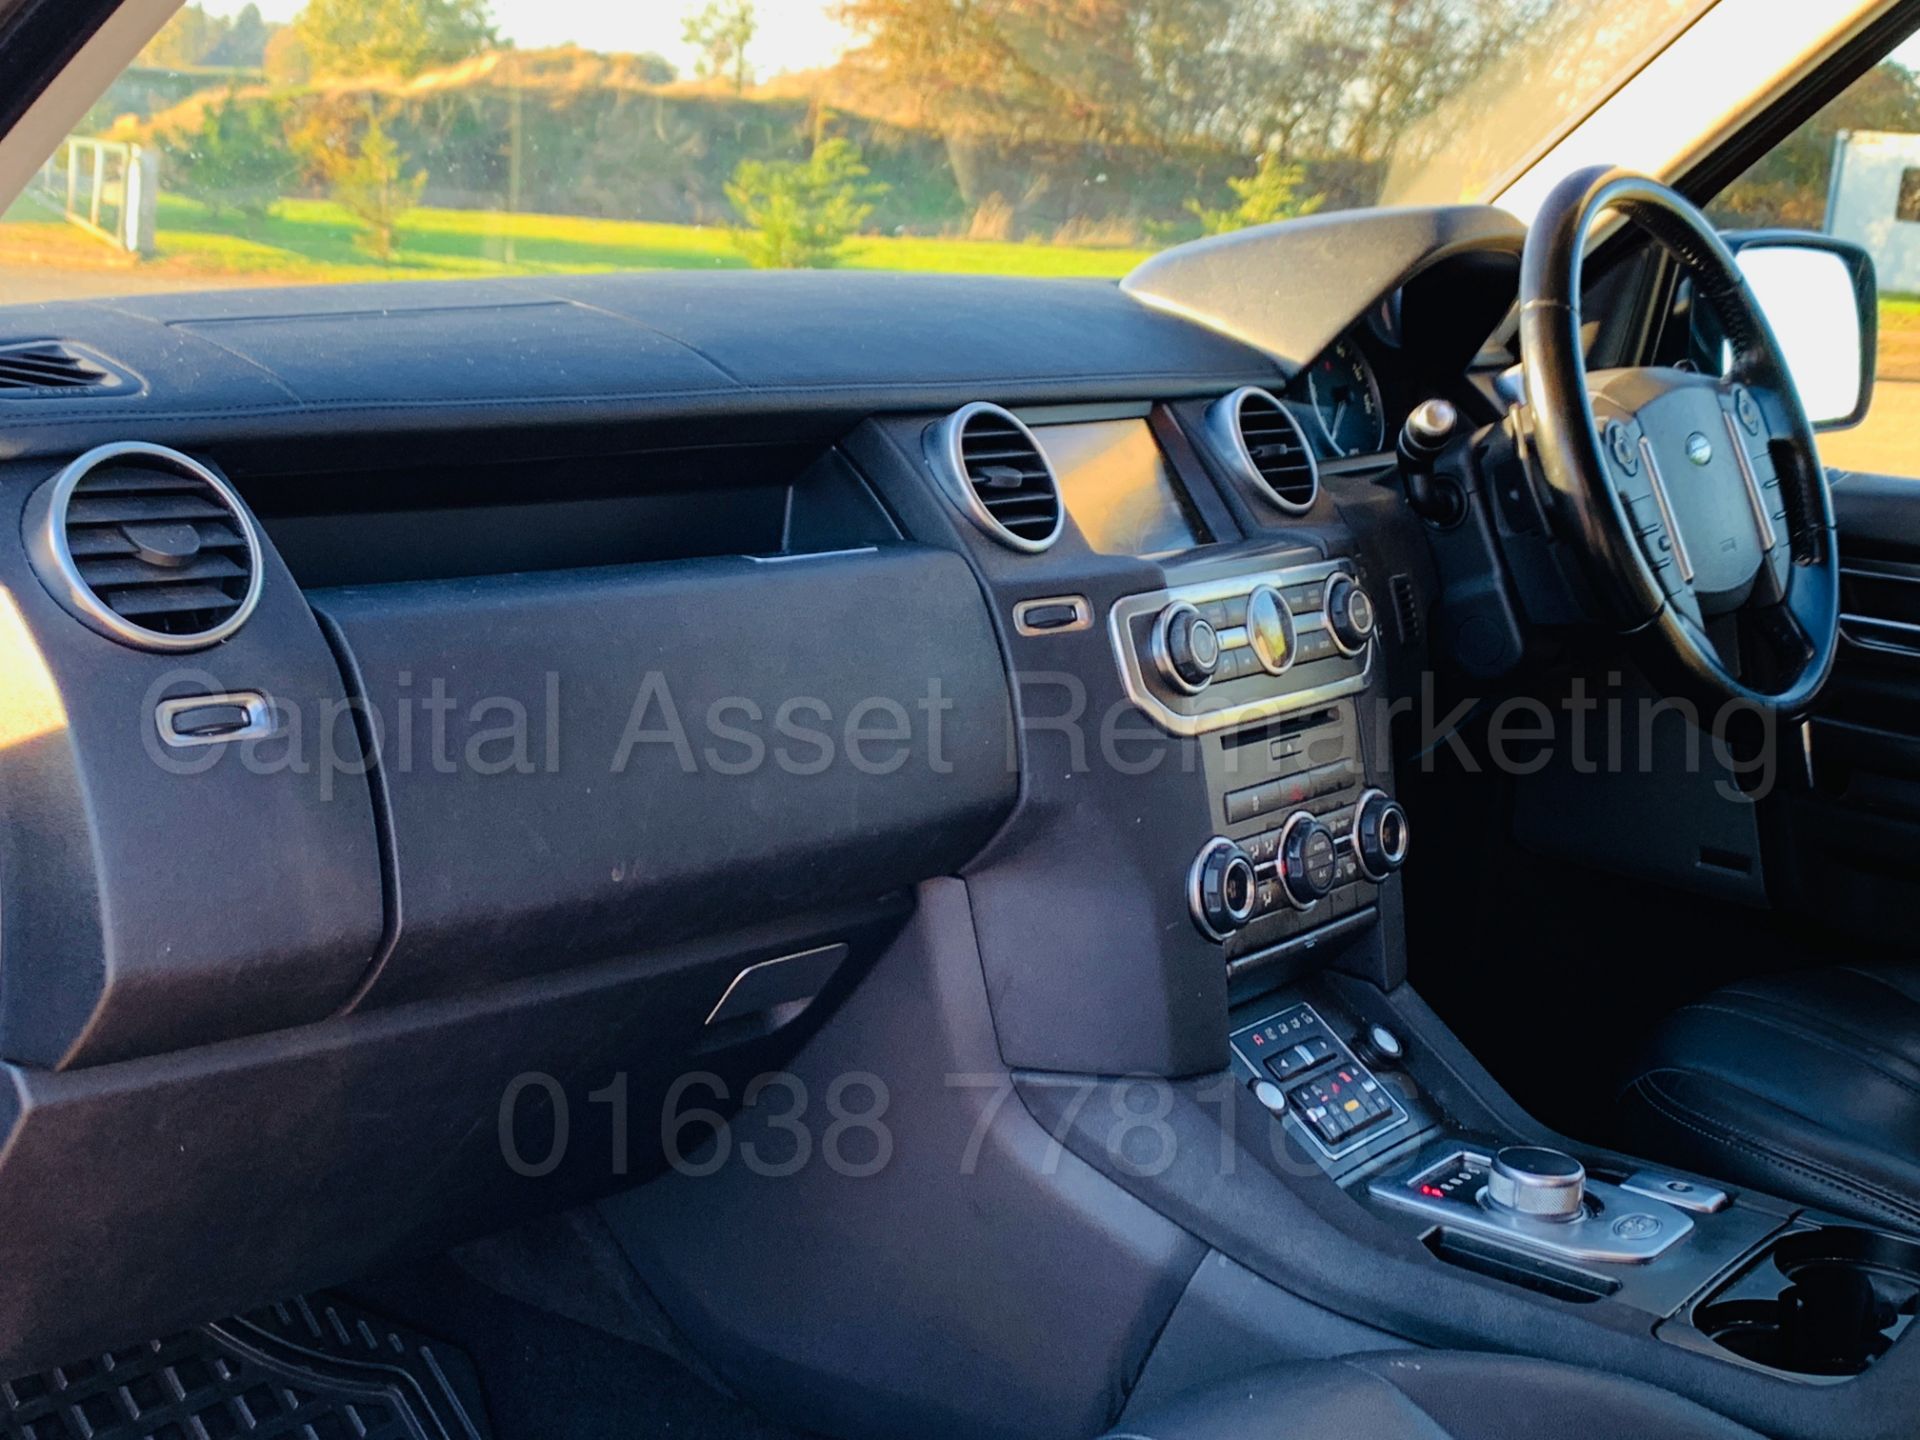 LAND ROVER DISCOVERY 4 **COMMERCIAL** (2014 MODEL) '3.0 SDV6 - 255 BHP - 8 SPEED AUTO' *HUGE SPEC* - Image 22 of 47